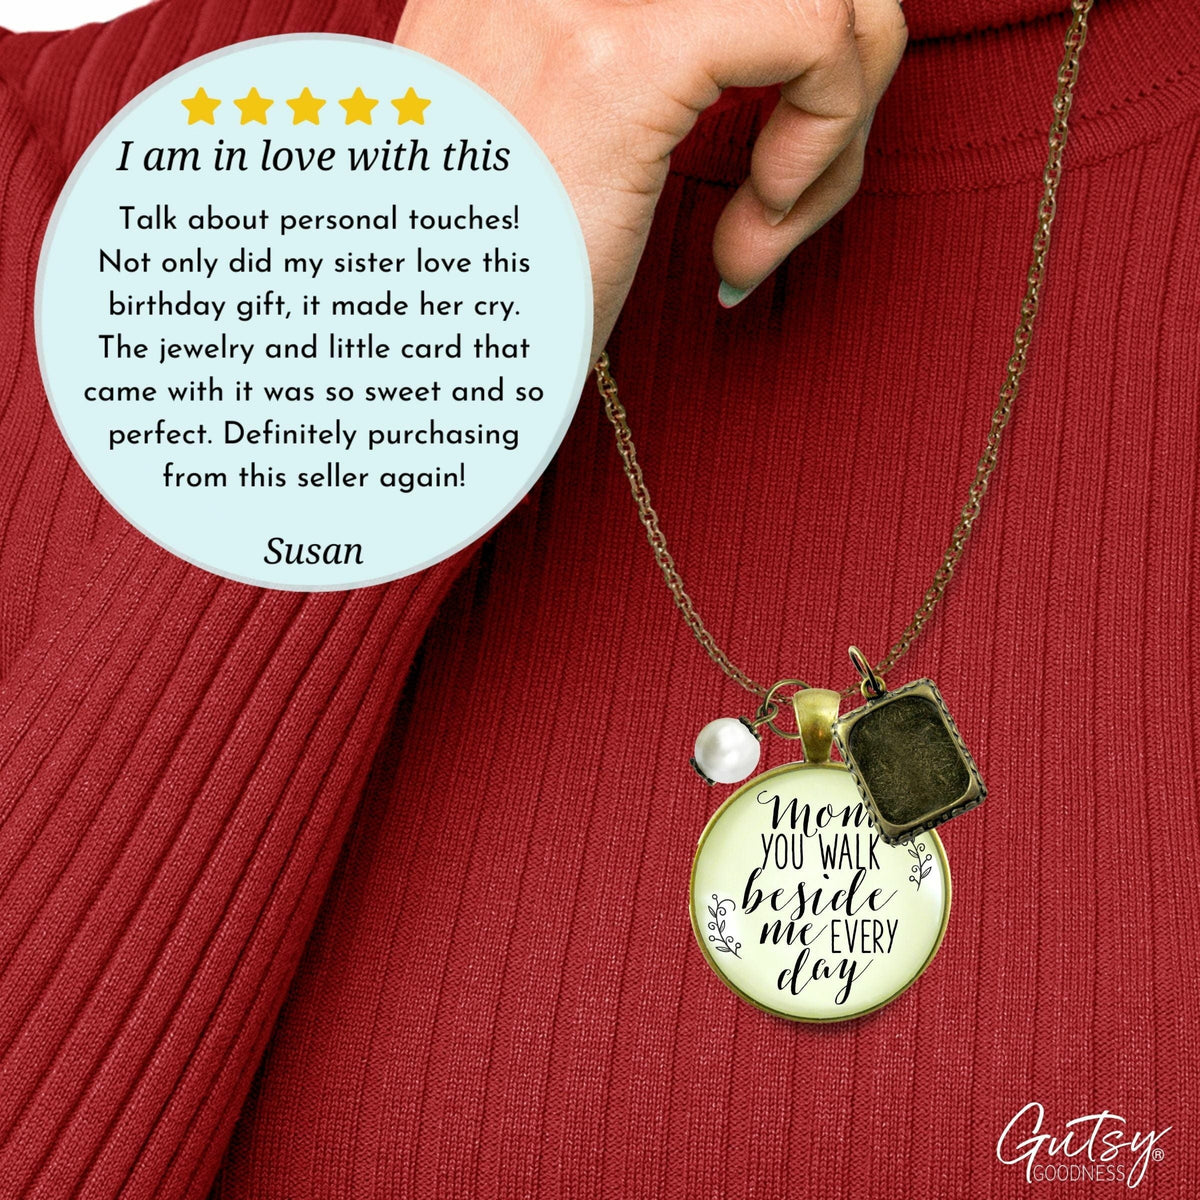 Gutsy Goodness Mom Remembrance Necklace You Walk Photo Frame Memorial Gift - Gutsy Goodness Handmade Jewelry;Mom Remembrance Necklace You Walk Photo Frame Memorial Gift - Gutsy Goodness Handmade Jewelry Gifts